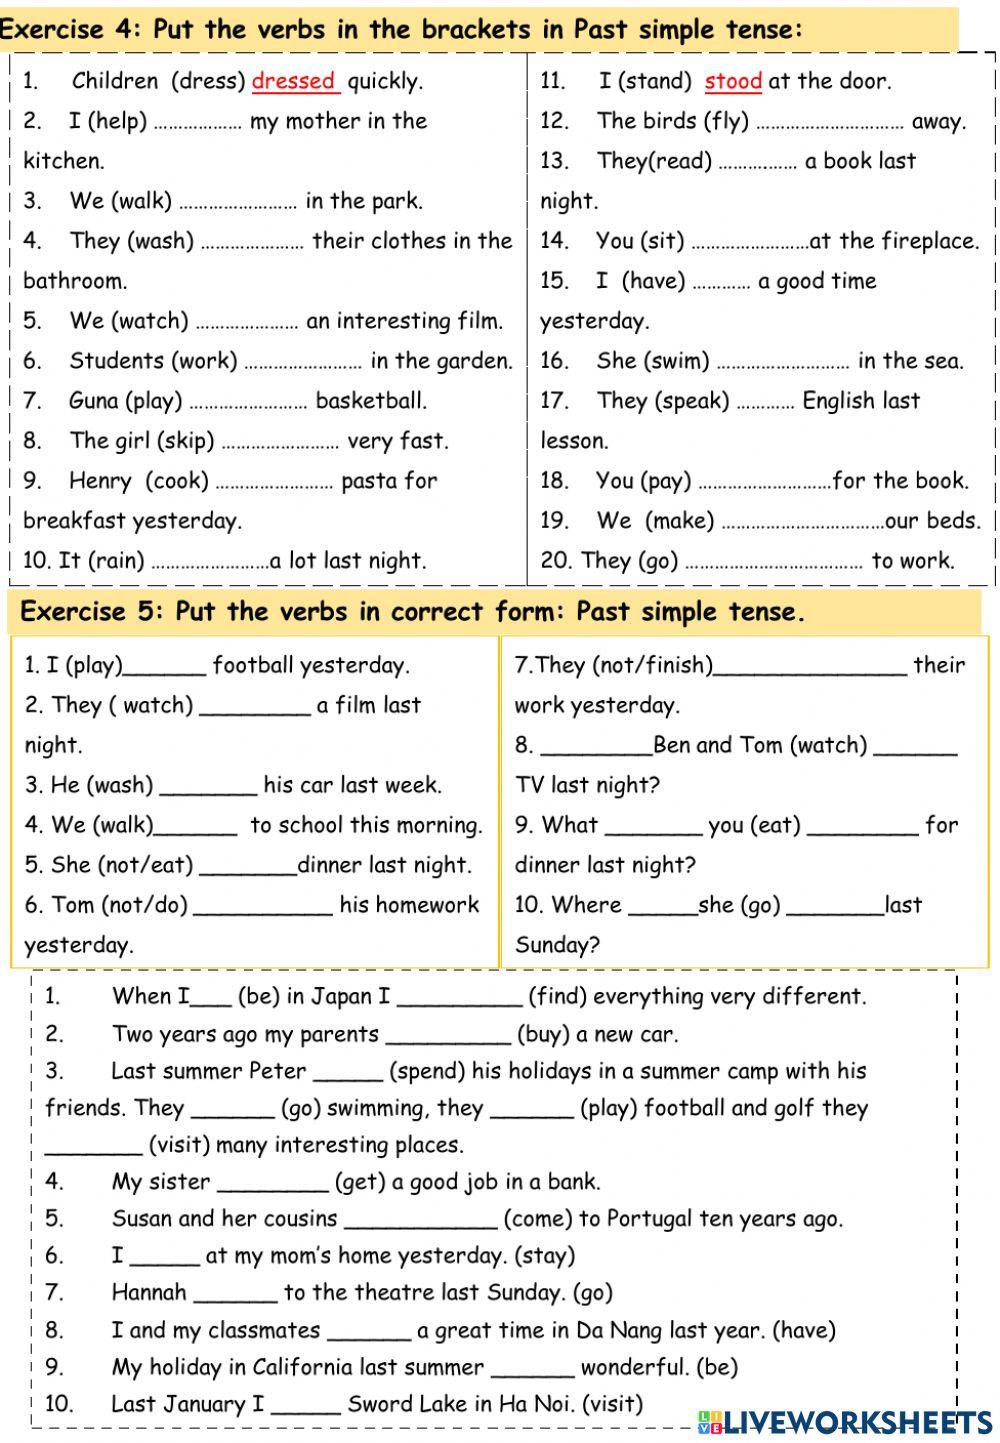 Past simple tense Review 1